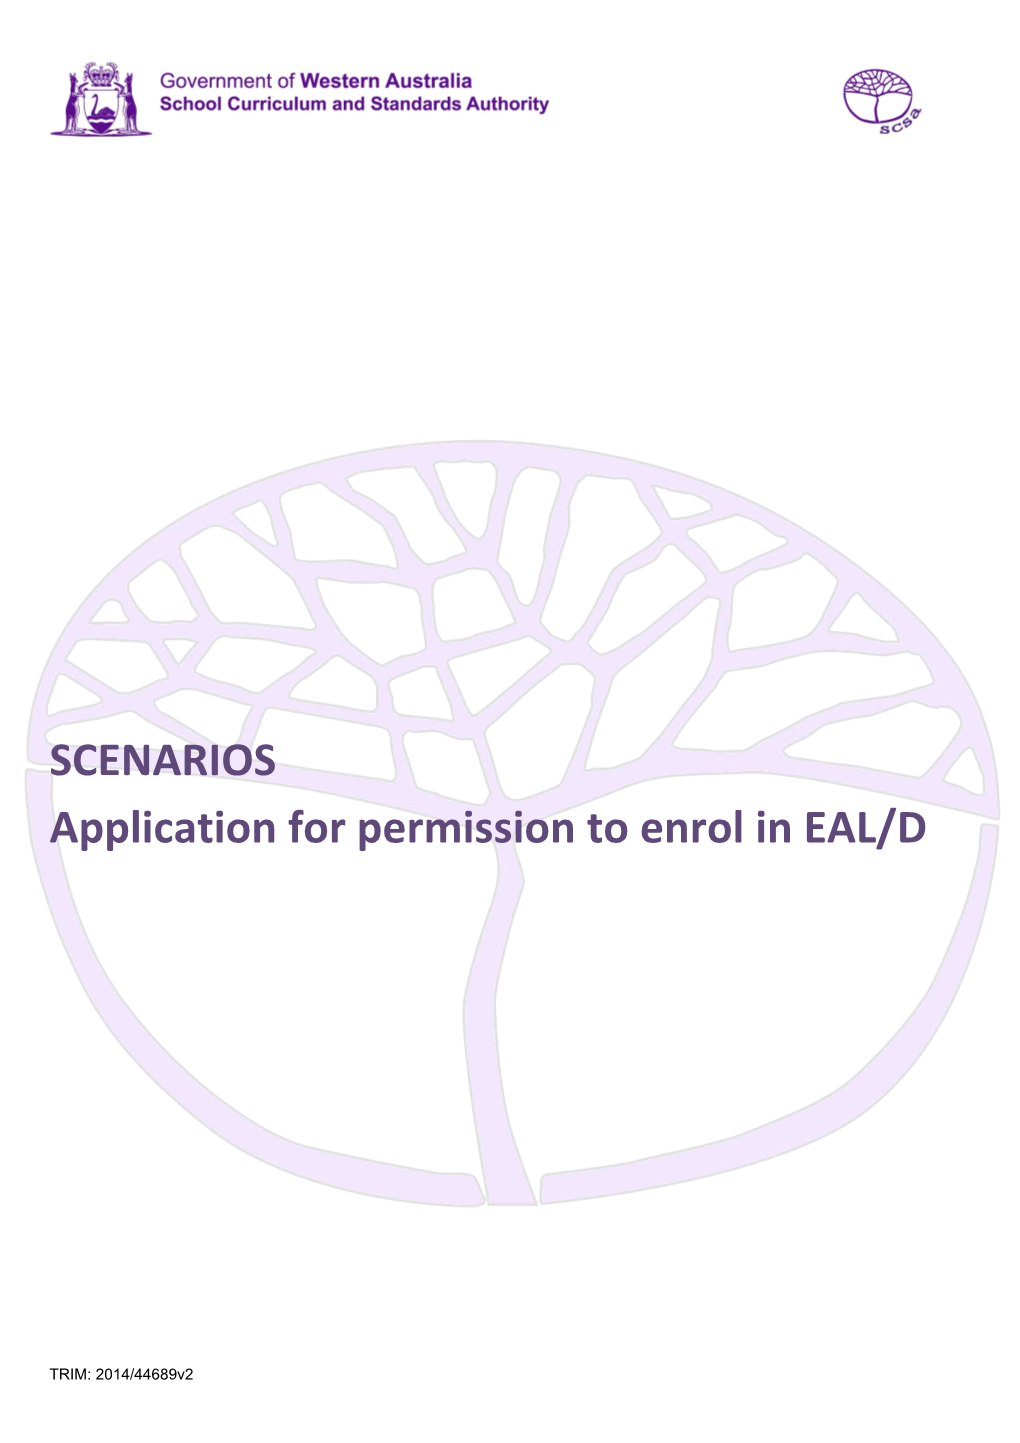 Application for Permission to Enrol in EAL/D